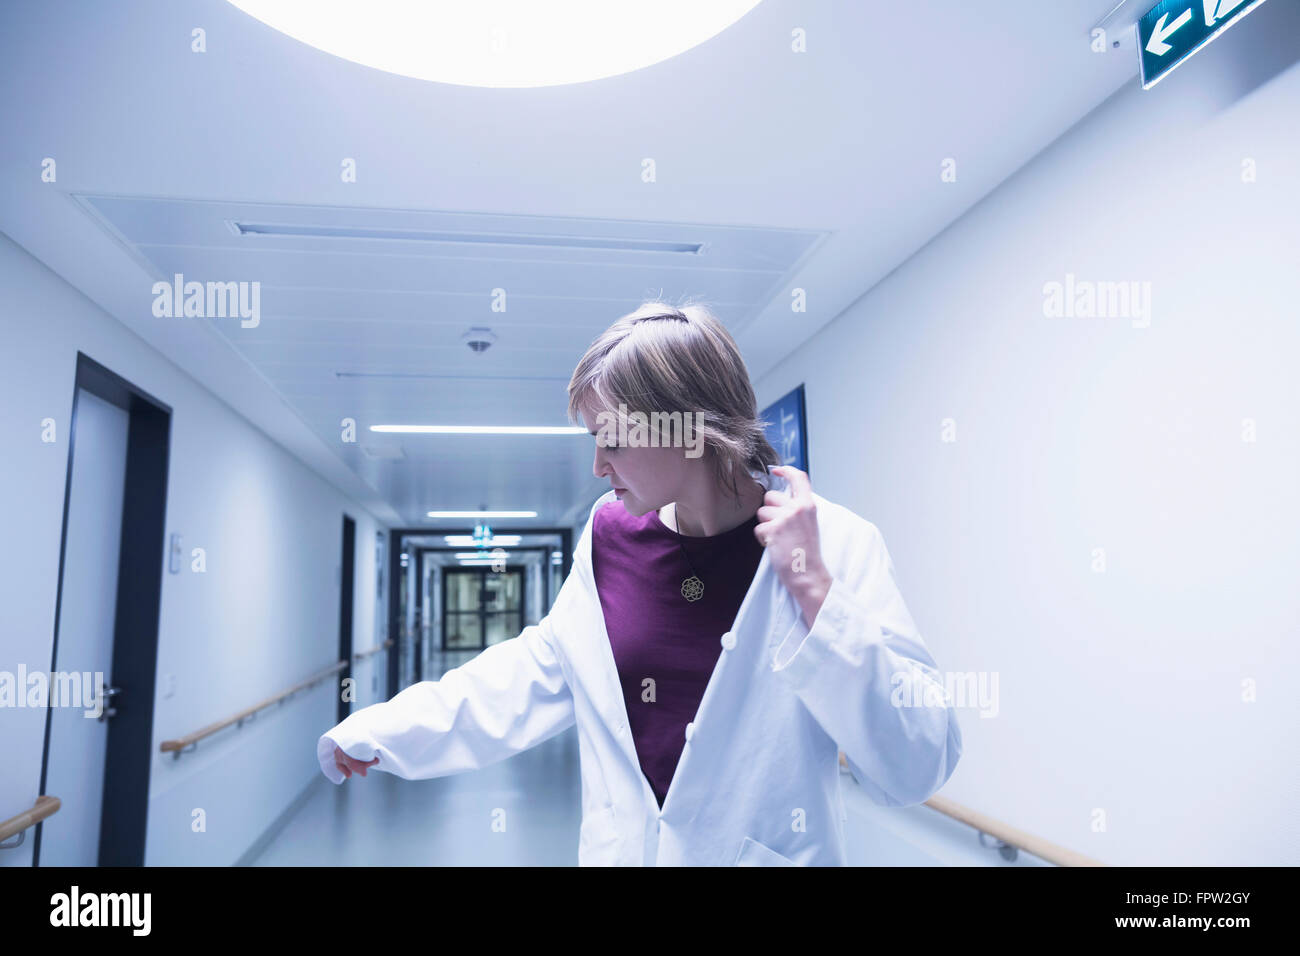 Young female doctor looking at her hand while walking in hospital corridor, Freiburg im Breisgau, Baden-Württemberg, Germany Stock Photo